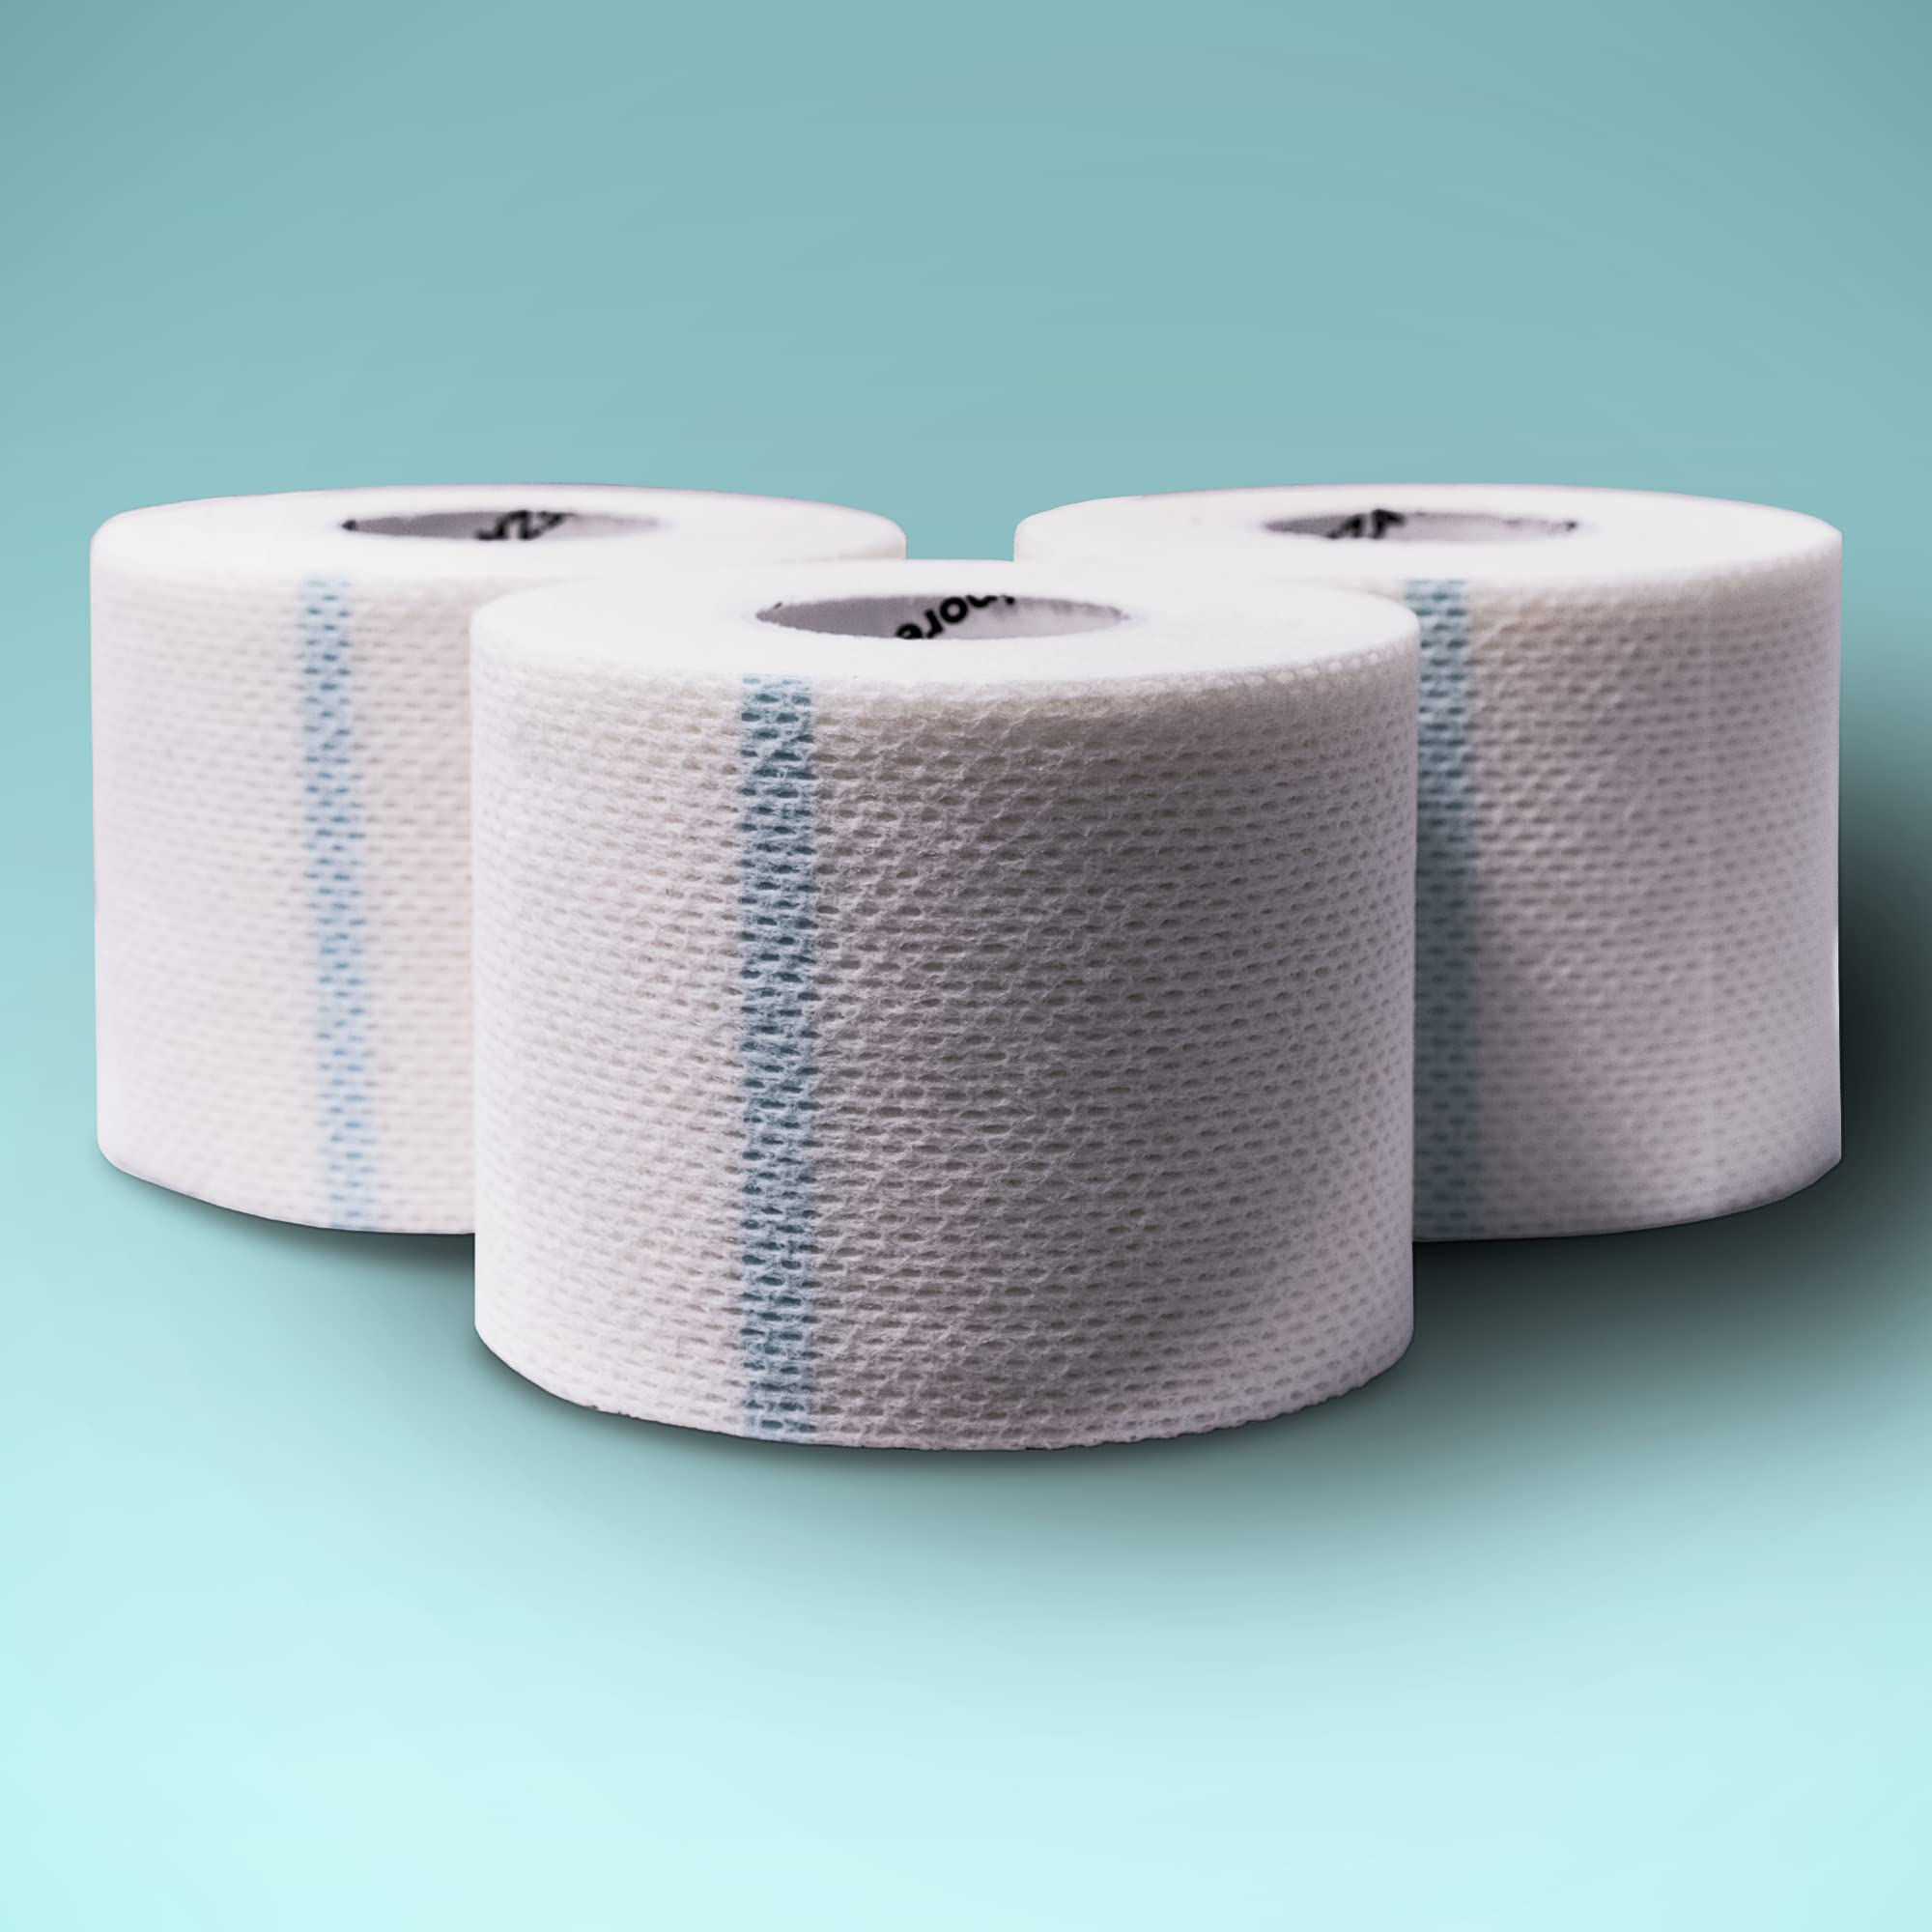 Book Cover Areza Medical Surgical Tape Three Rolls Porous Skin Soft Fabric Cloth Adhesive Tape 2